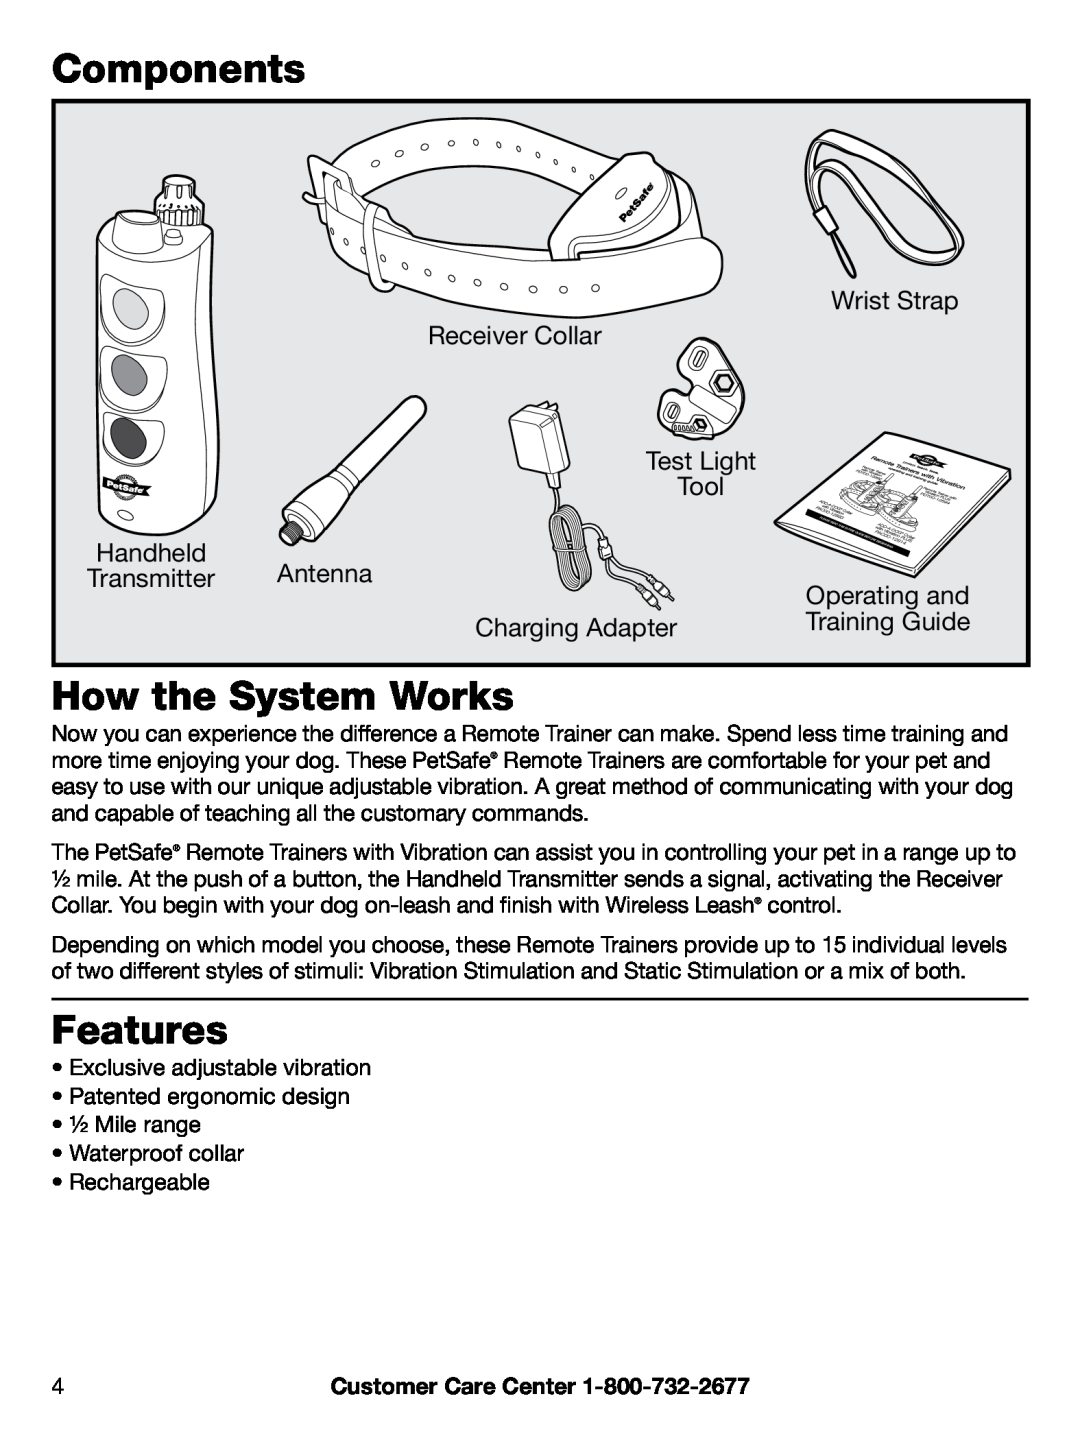 Petsafe PDT00-12894 Components, How the System Works, Features, Wrist Strap, Receiver Collar, Antenna, Charging Adapter 